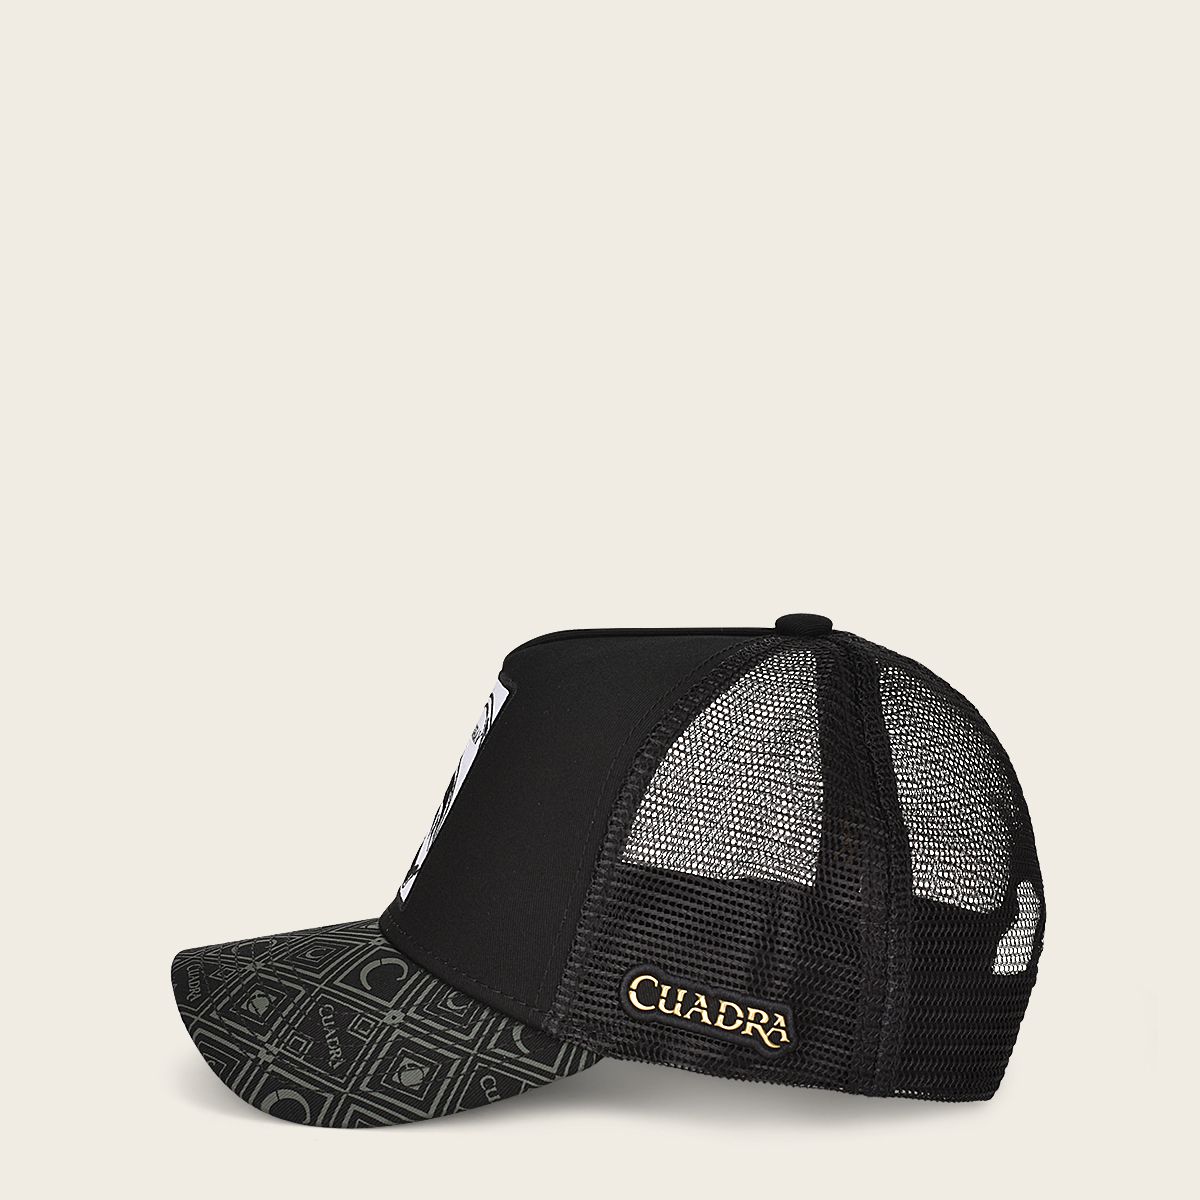 Cuadra black cap with embroidery stingray patch